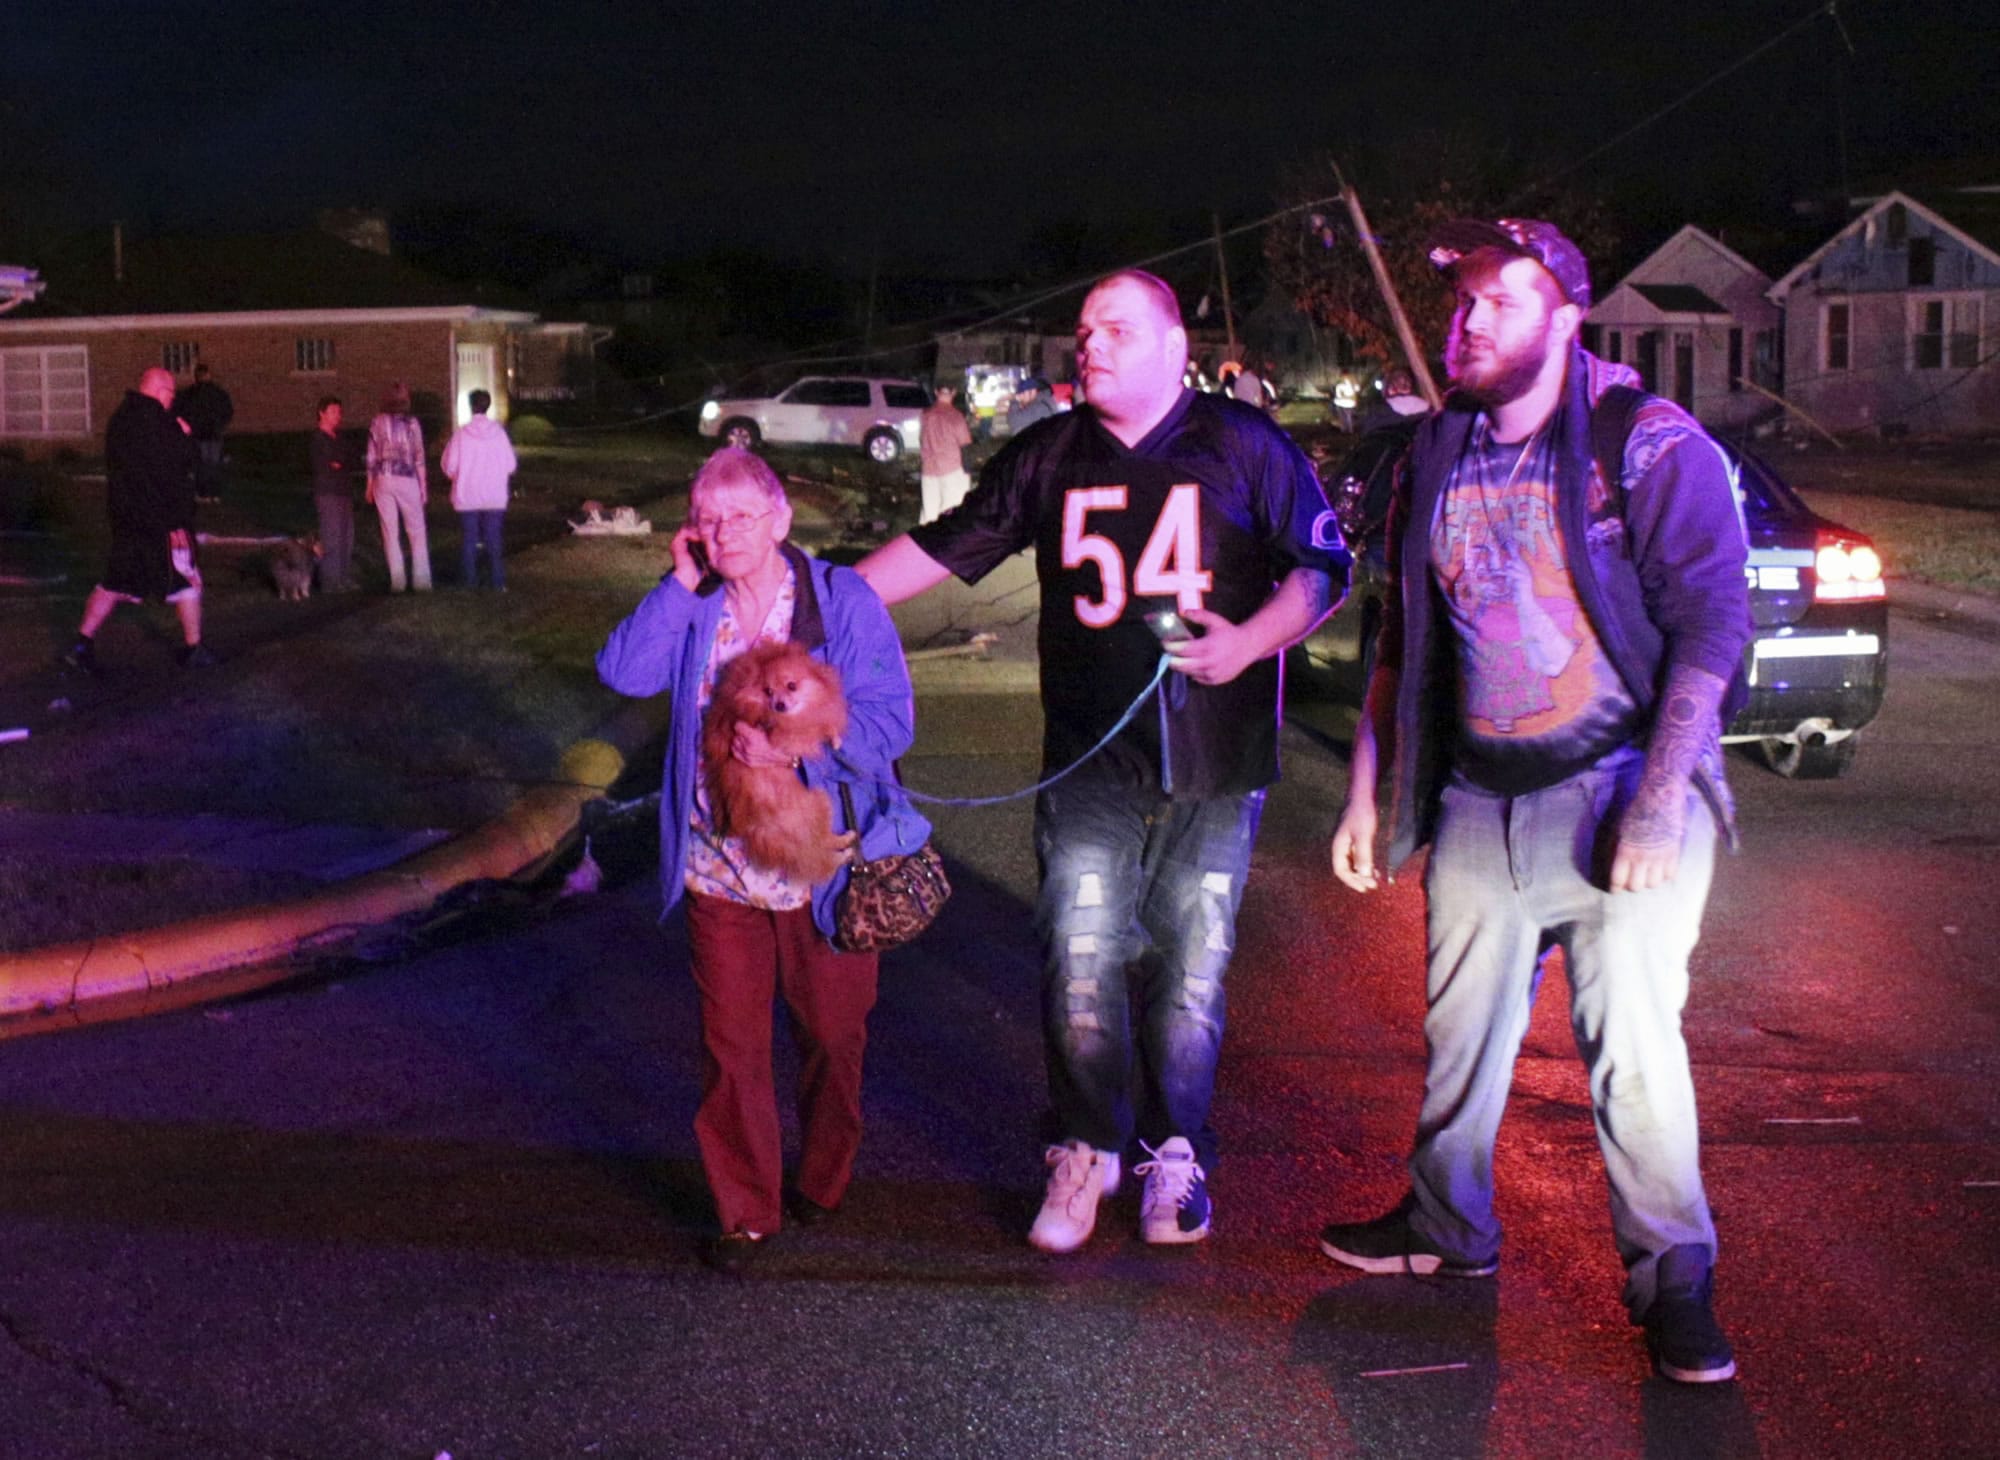 Jeremy Gossett, right, and Mathew McBee, center, help escort a woman and her dog to a fire truck following a tornado in Naplate, Ill., Tuesday, Feb. 28, 2017. Tornadoes touched down in the upper Midwest and northern Arkansas on Tuesday.